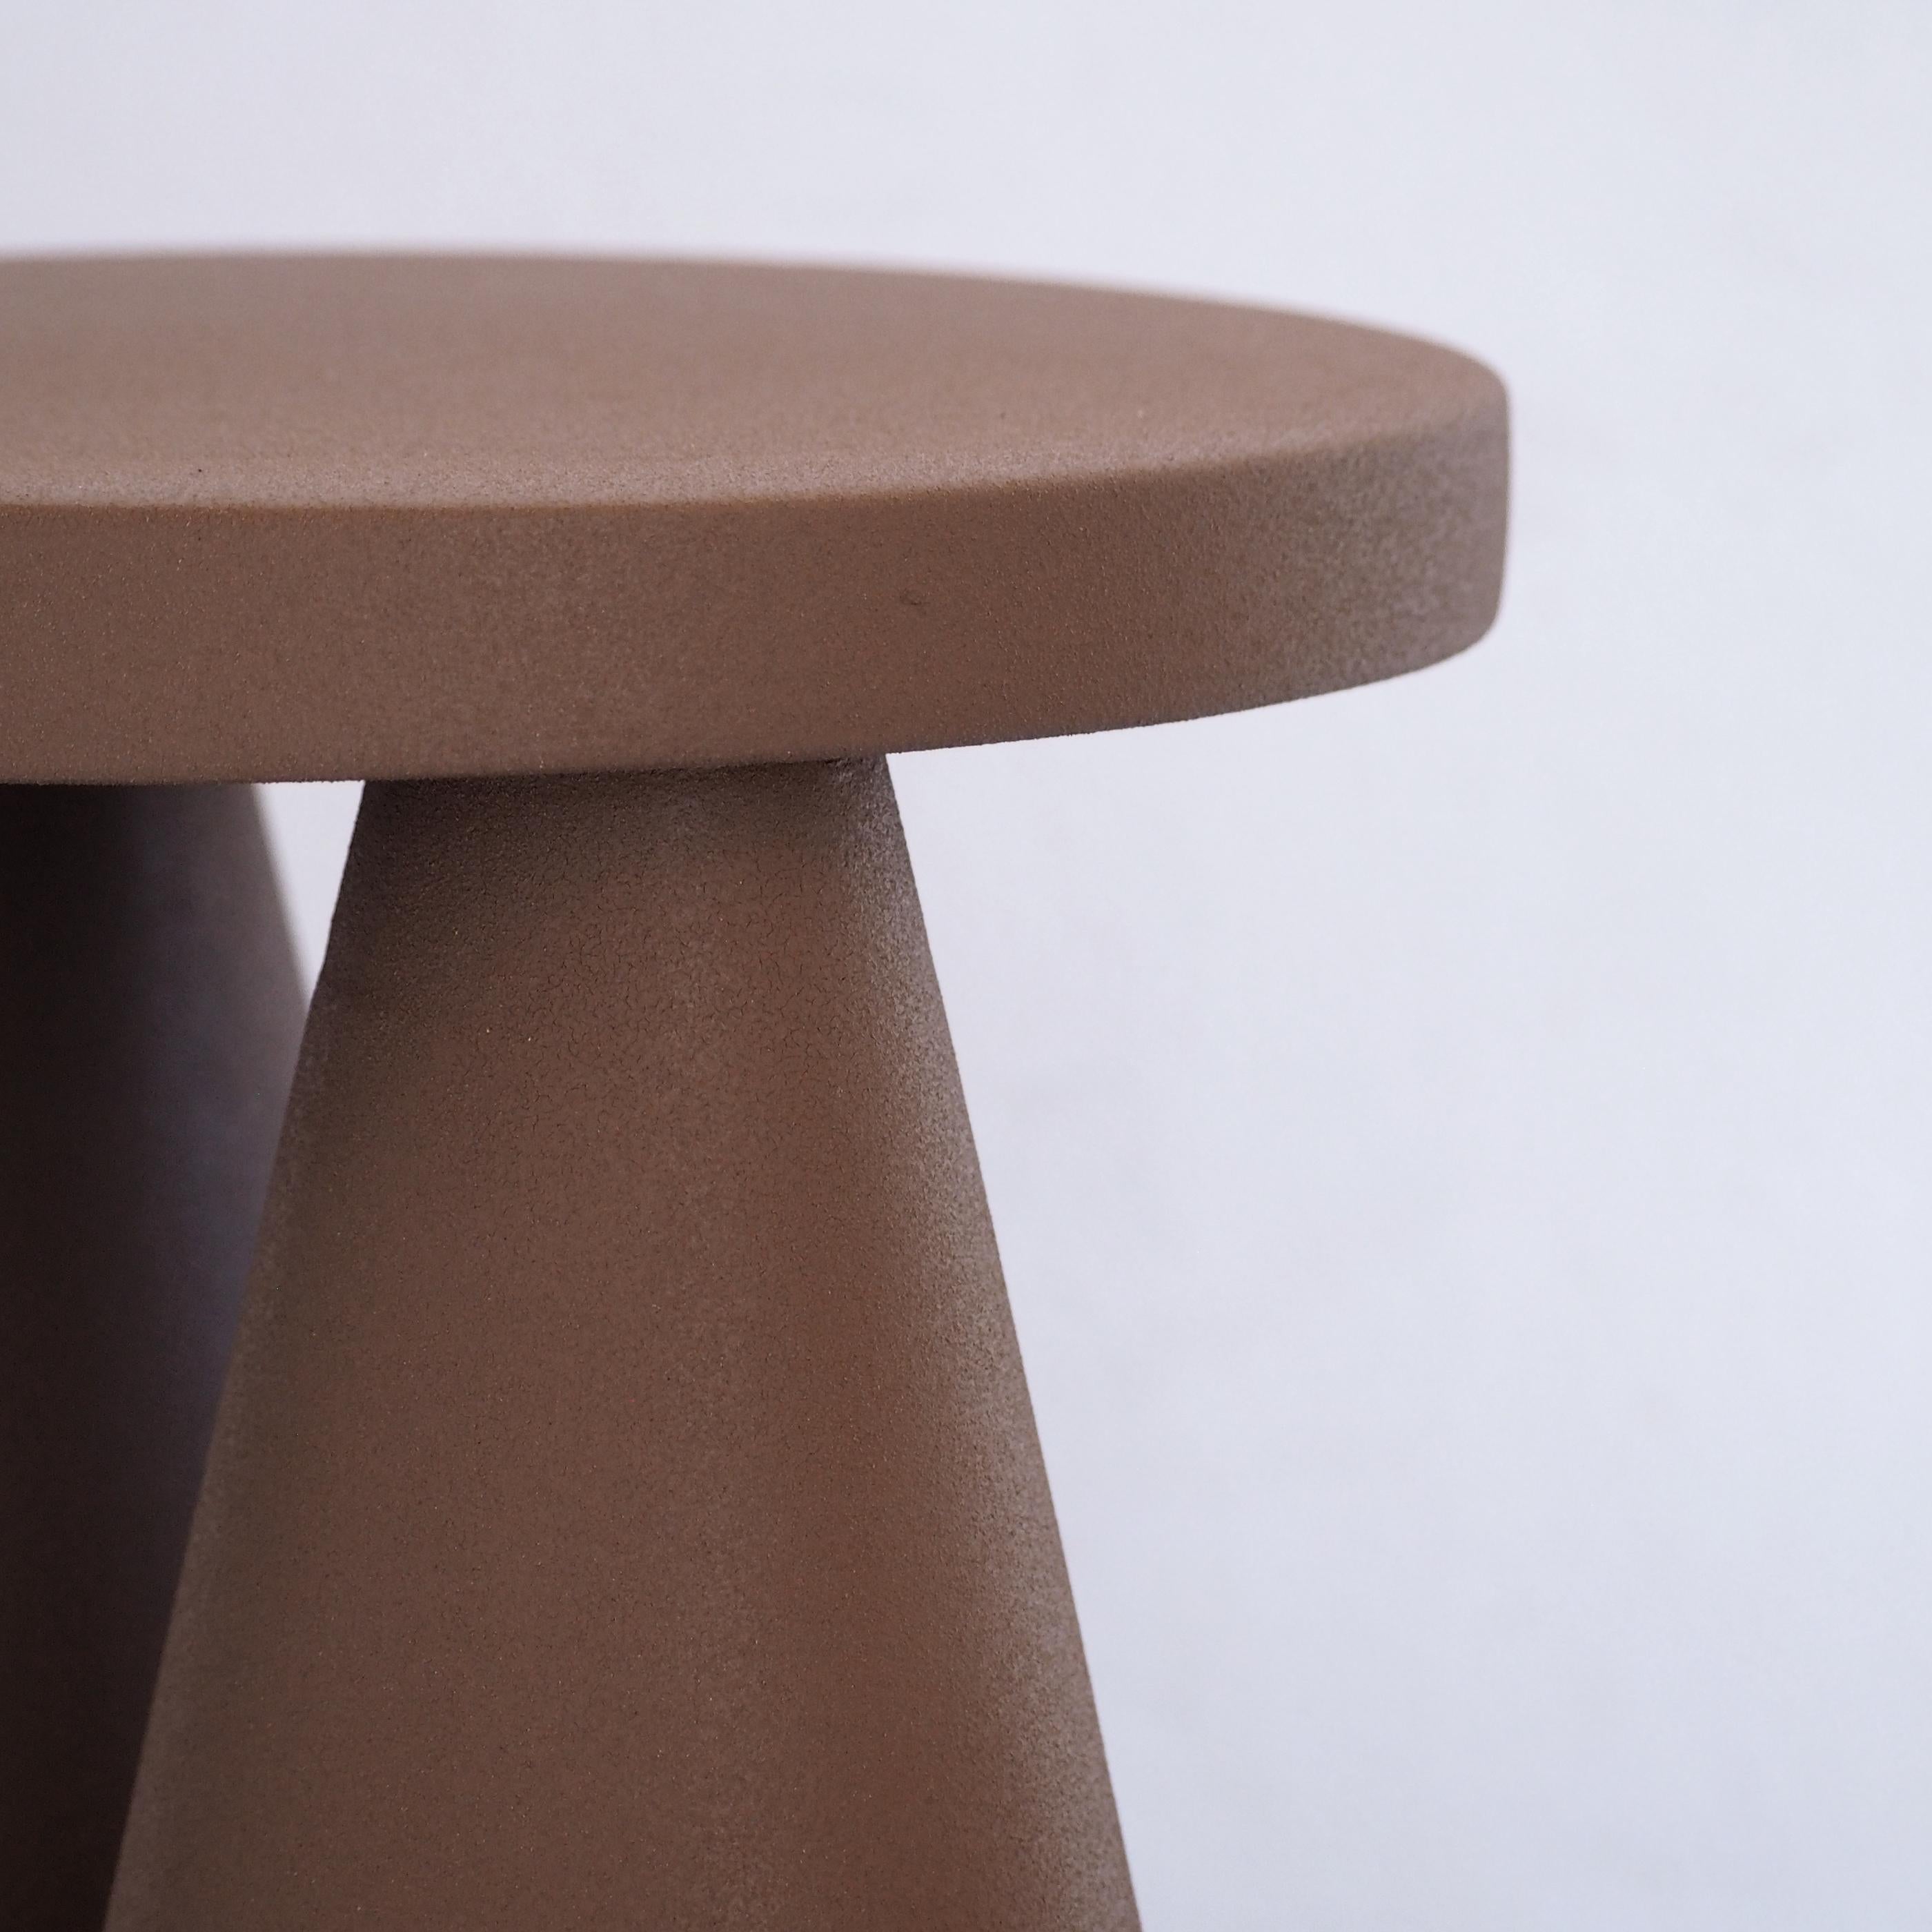 Isola /Ceramic Conic Side Table /Chocolate, Designed by Cara /Davide for Portego In New Condition For Sale In Stienta, IT